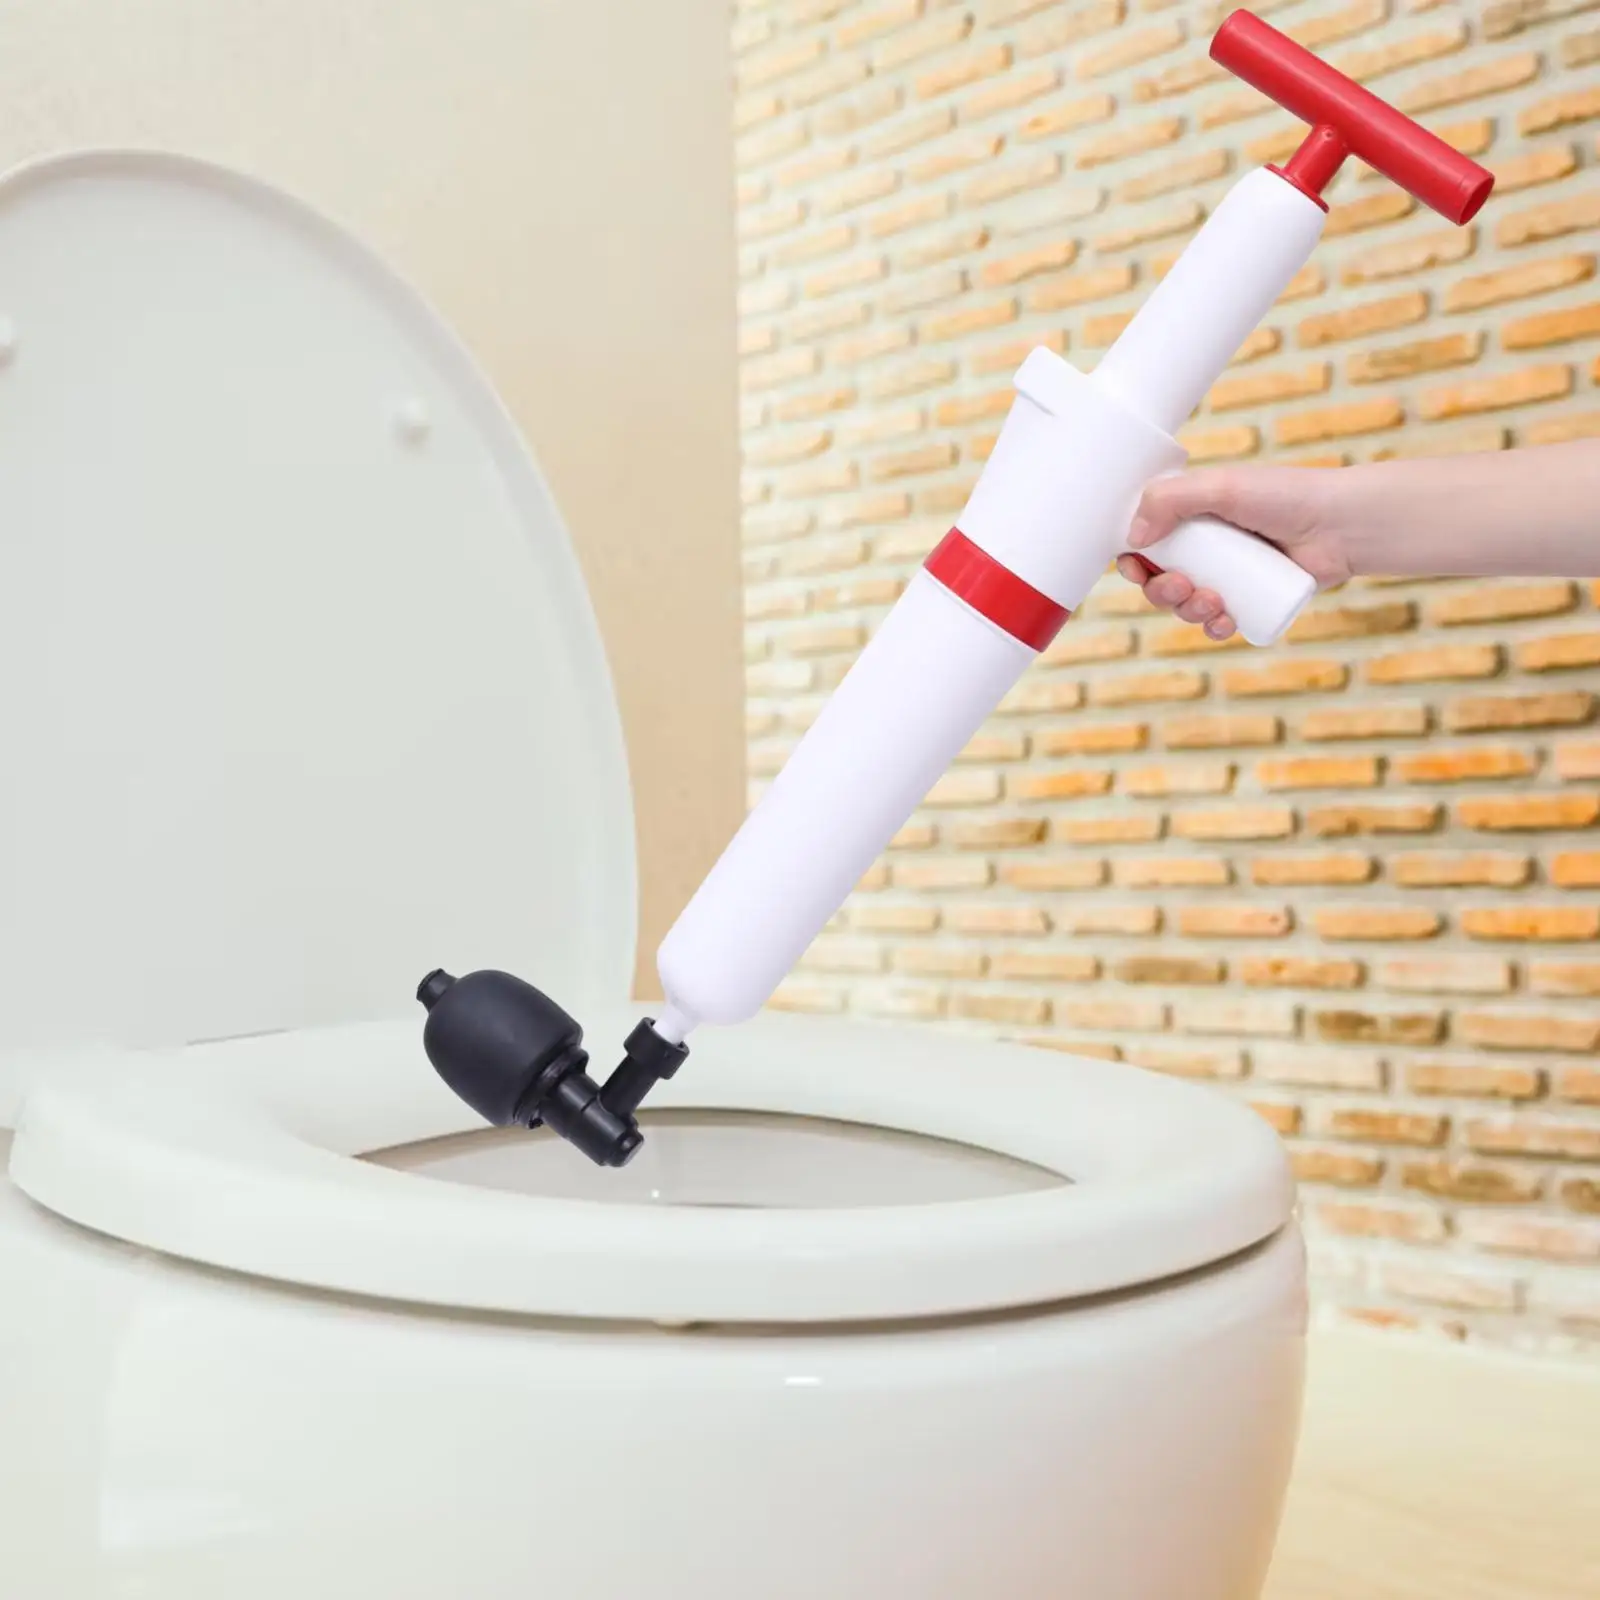 High Pressure Toilet Plunger Air Drain Blaster Kit with Real Time Barometer Clogged Pipe Toilet Unclogger for Kitchen Sink Home